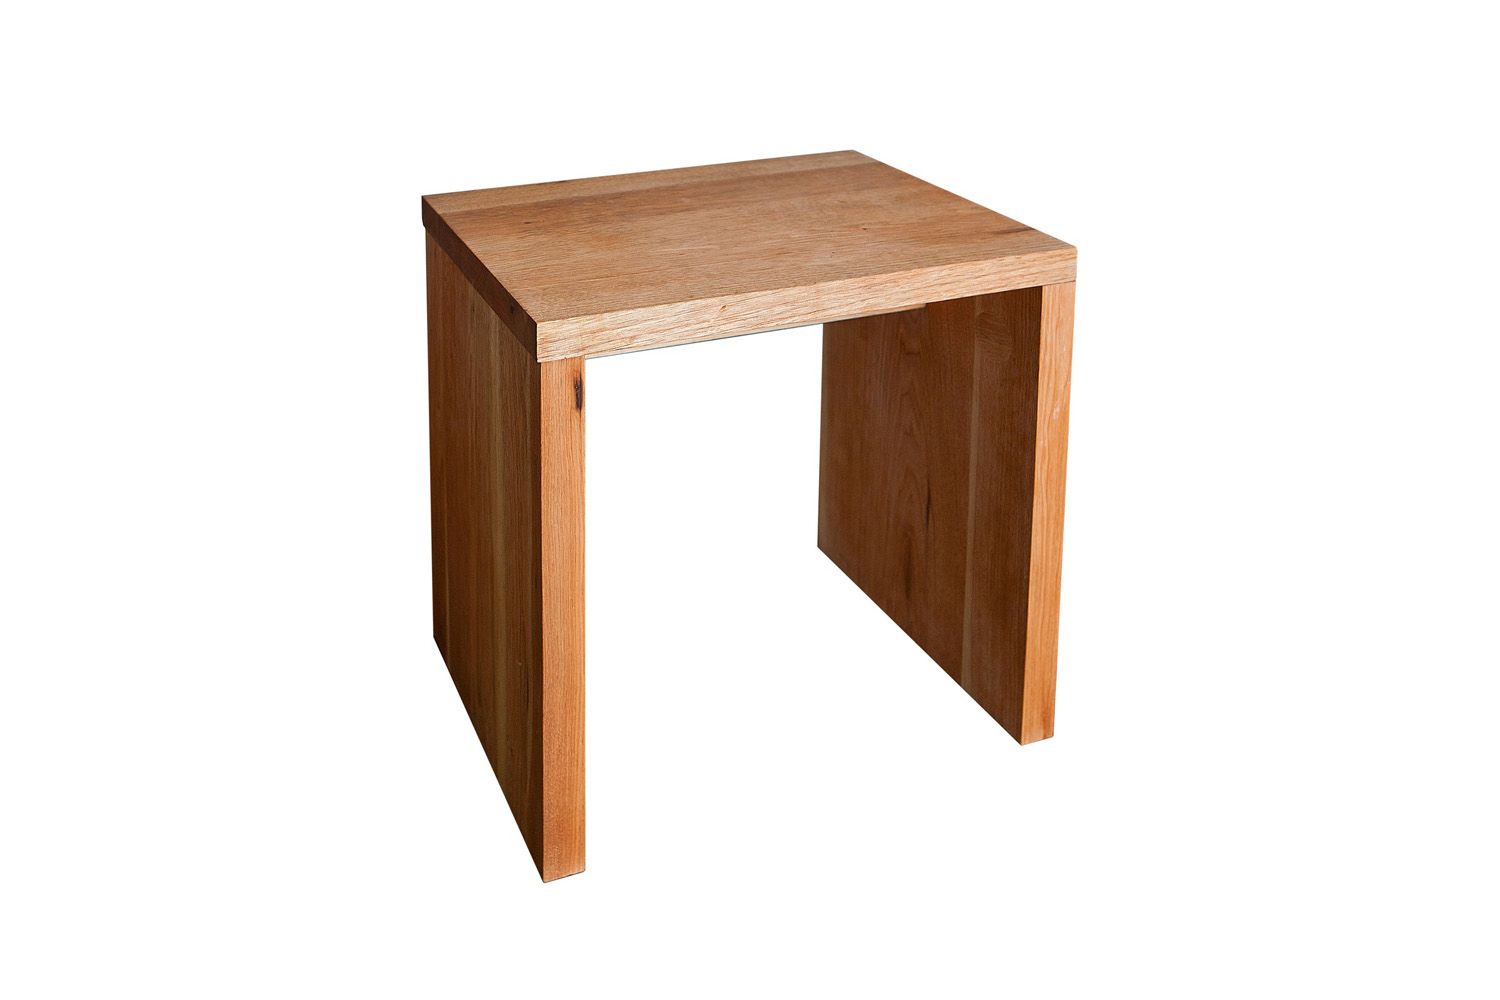 the mash studios lax dining stool is $325 at horne. 15